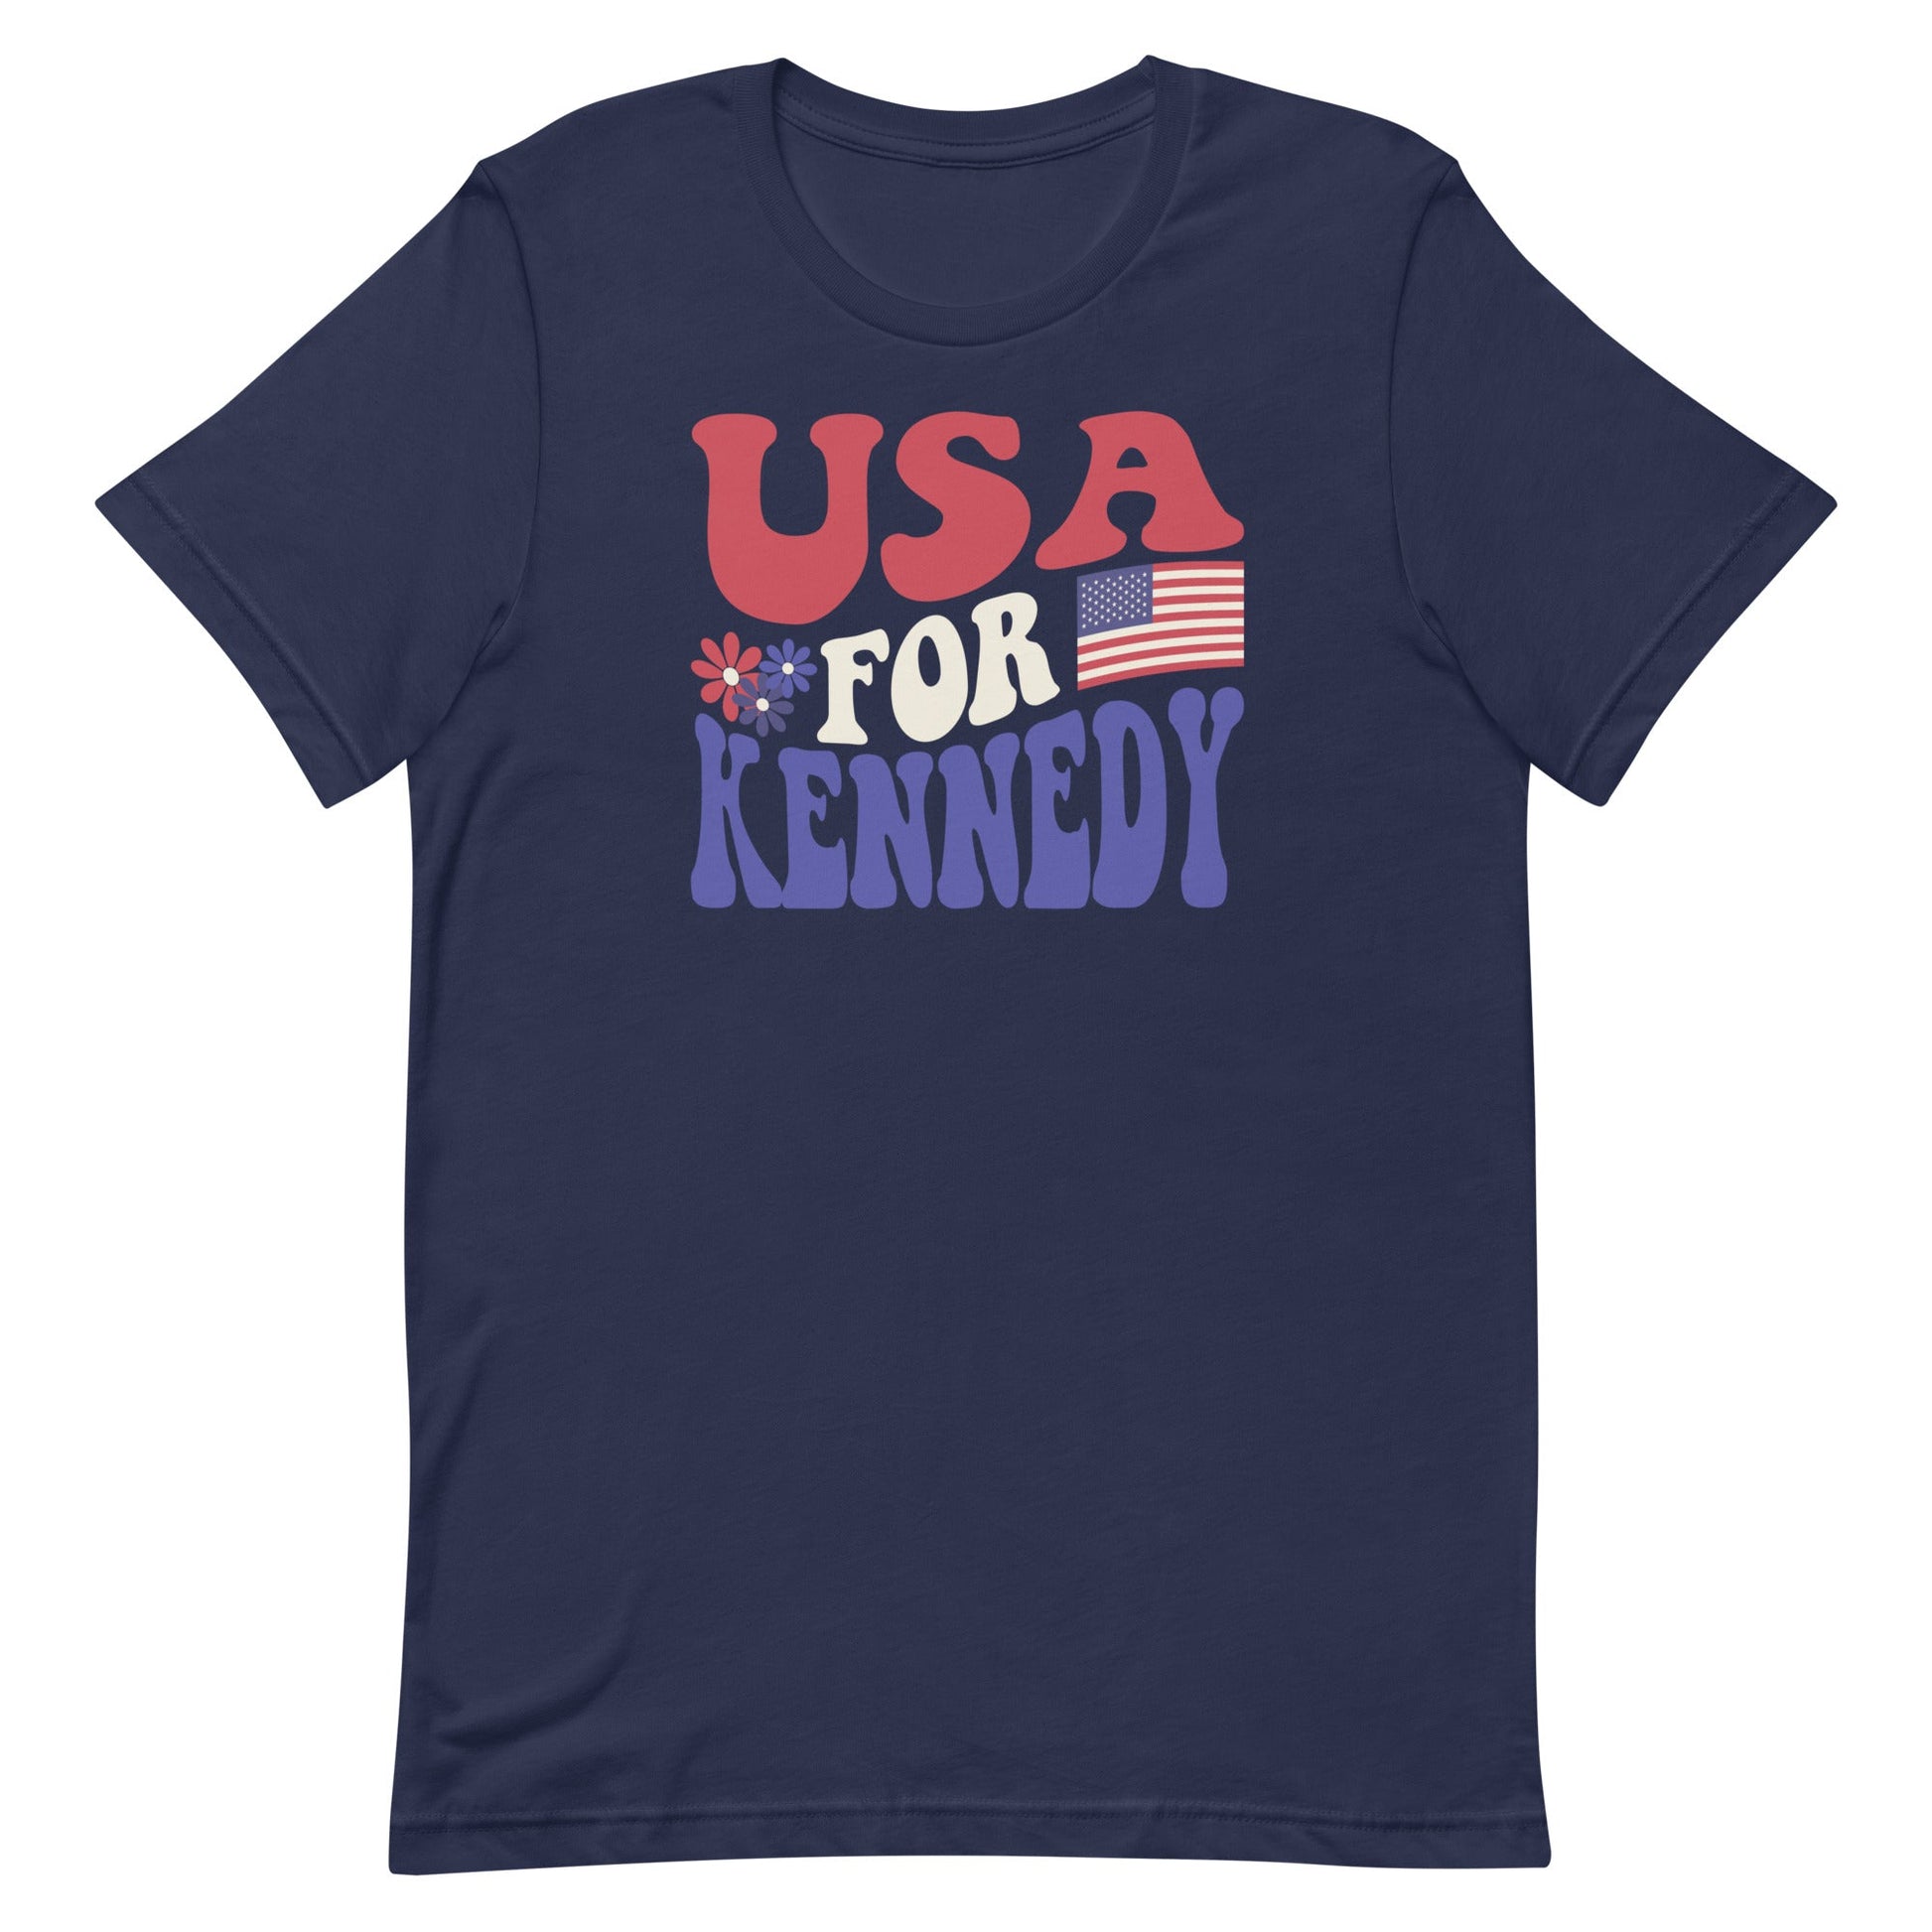 USA for Kennedy Unisex Tee - TEAM KENNEDY. All rights reserved